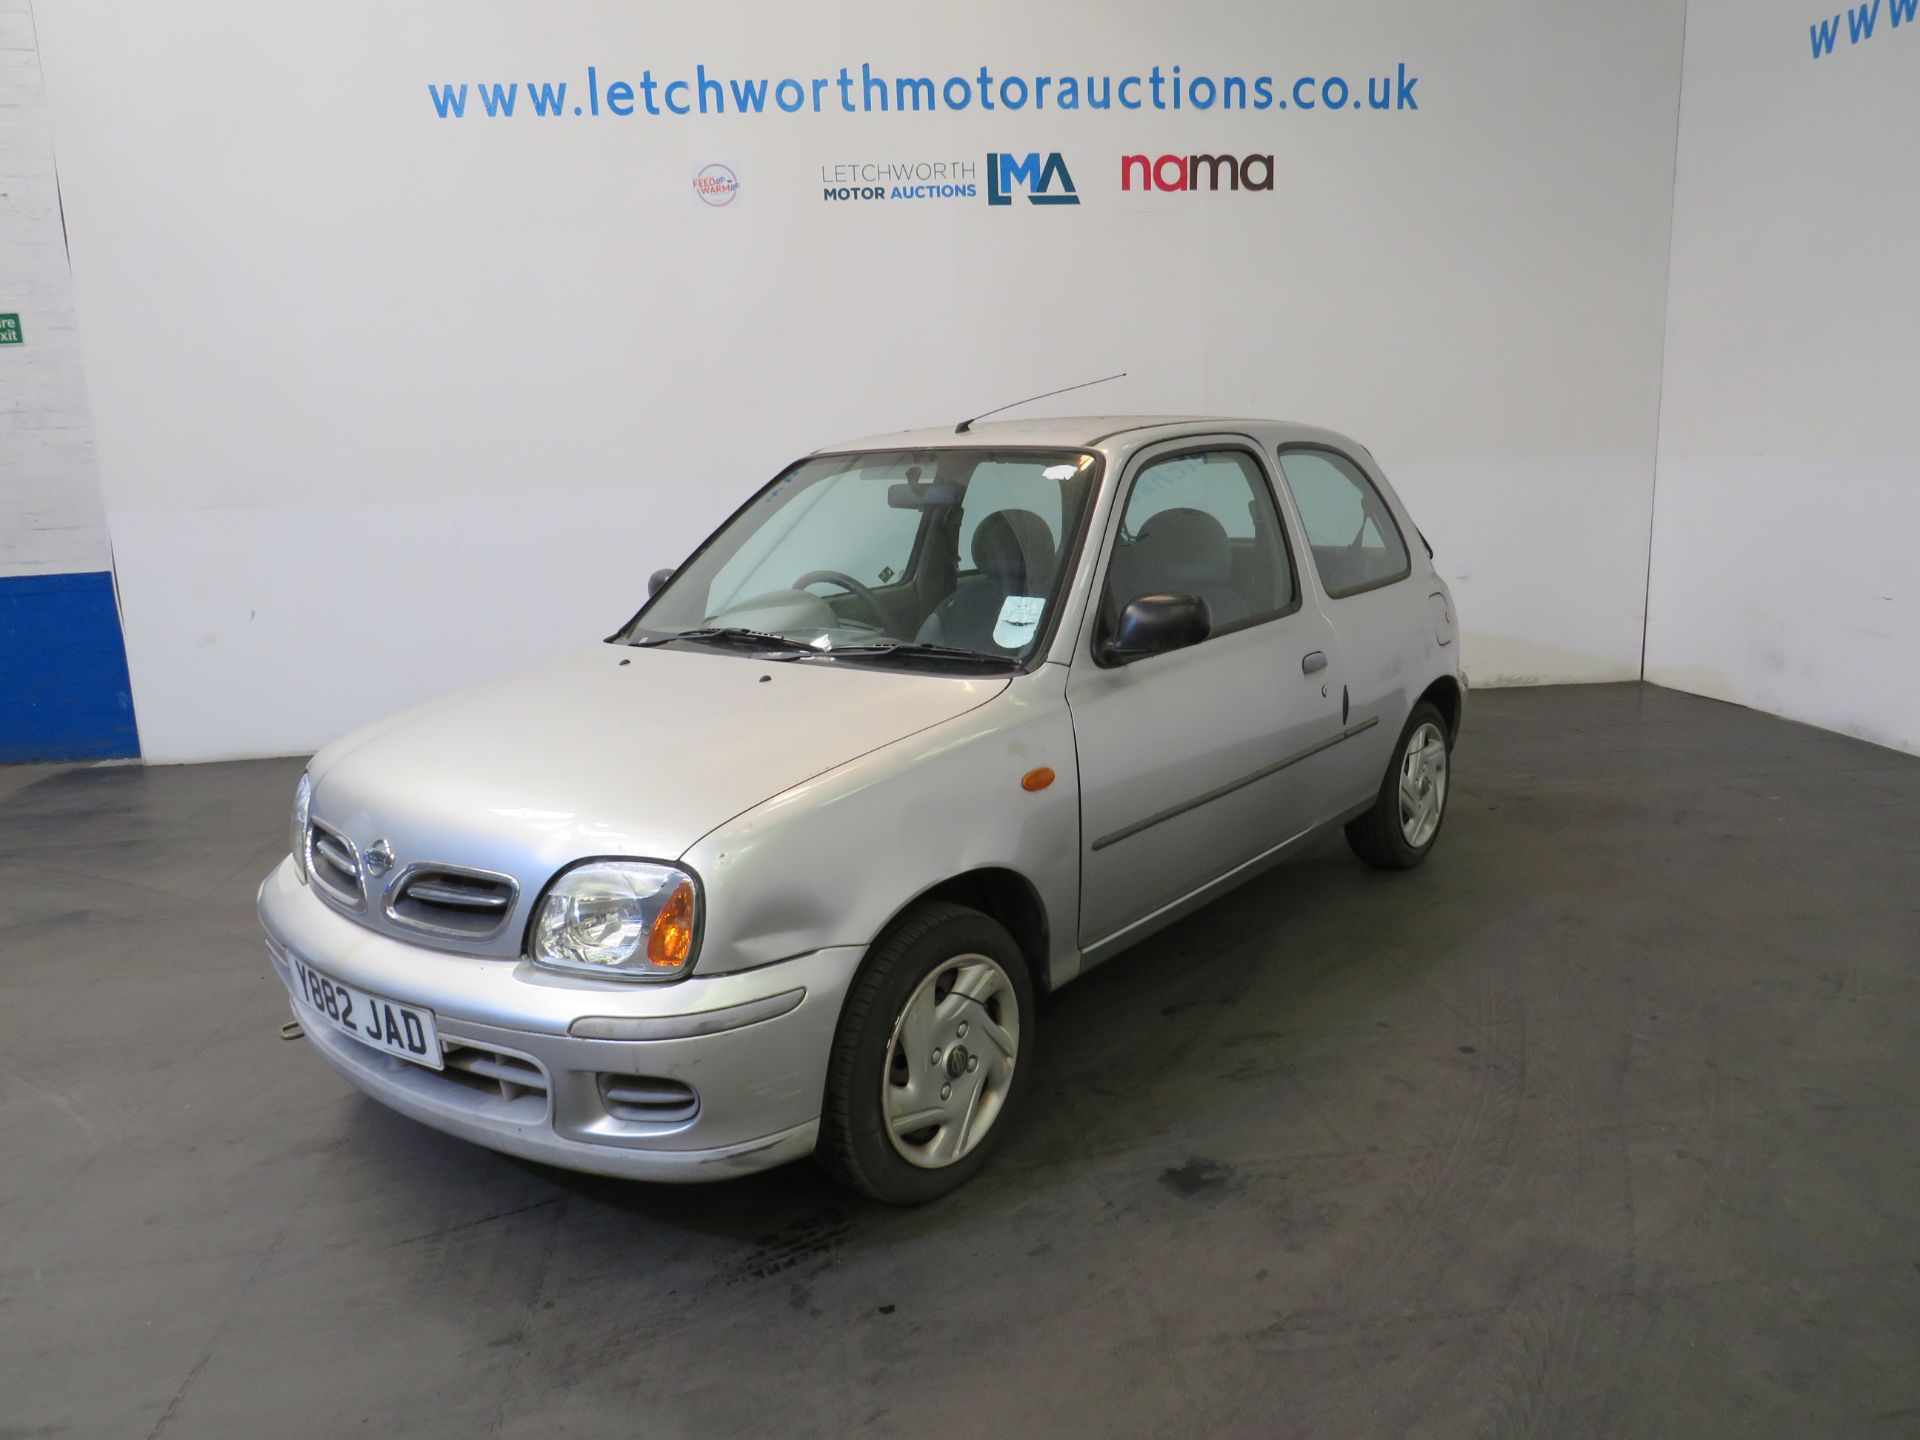 2001 Nissan Micra S - 998cc - Image 3 of 12